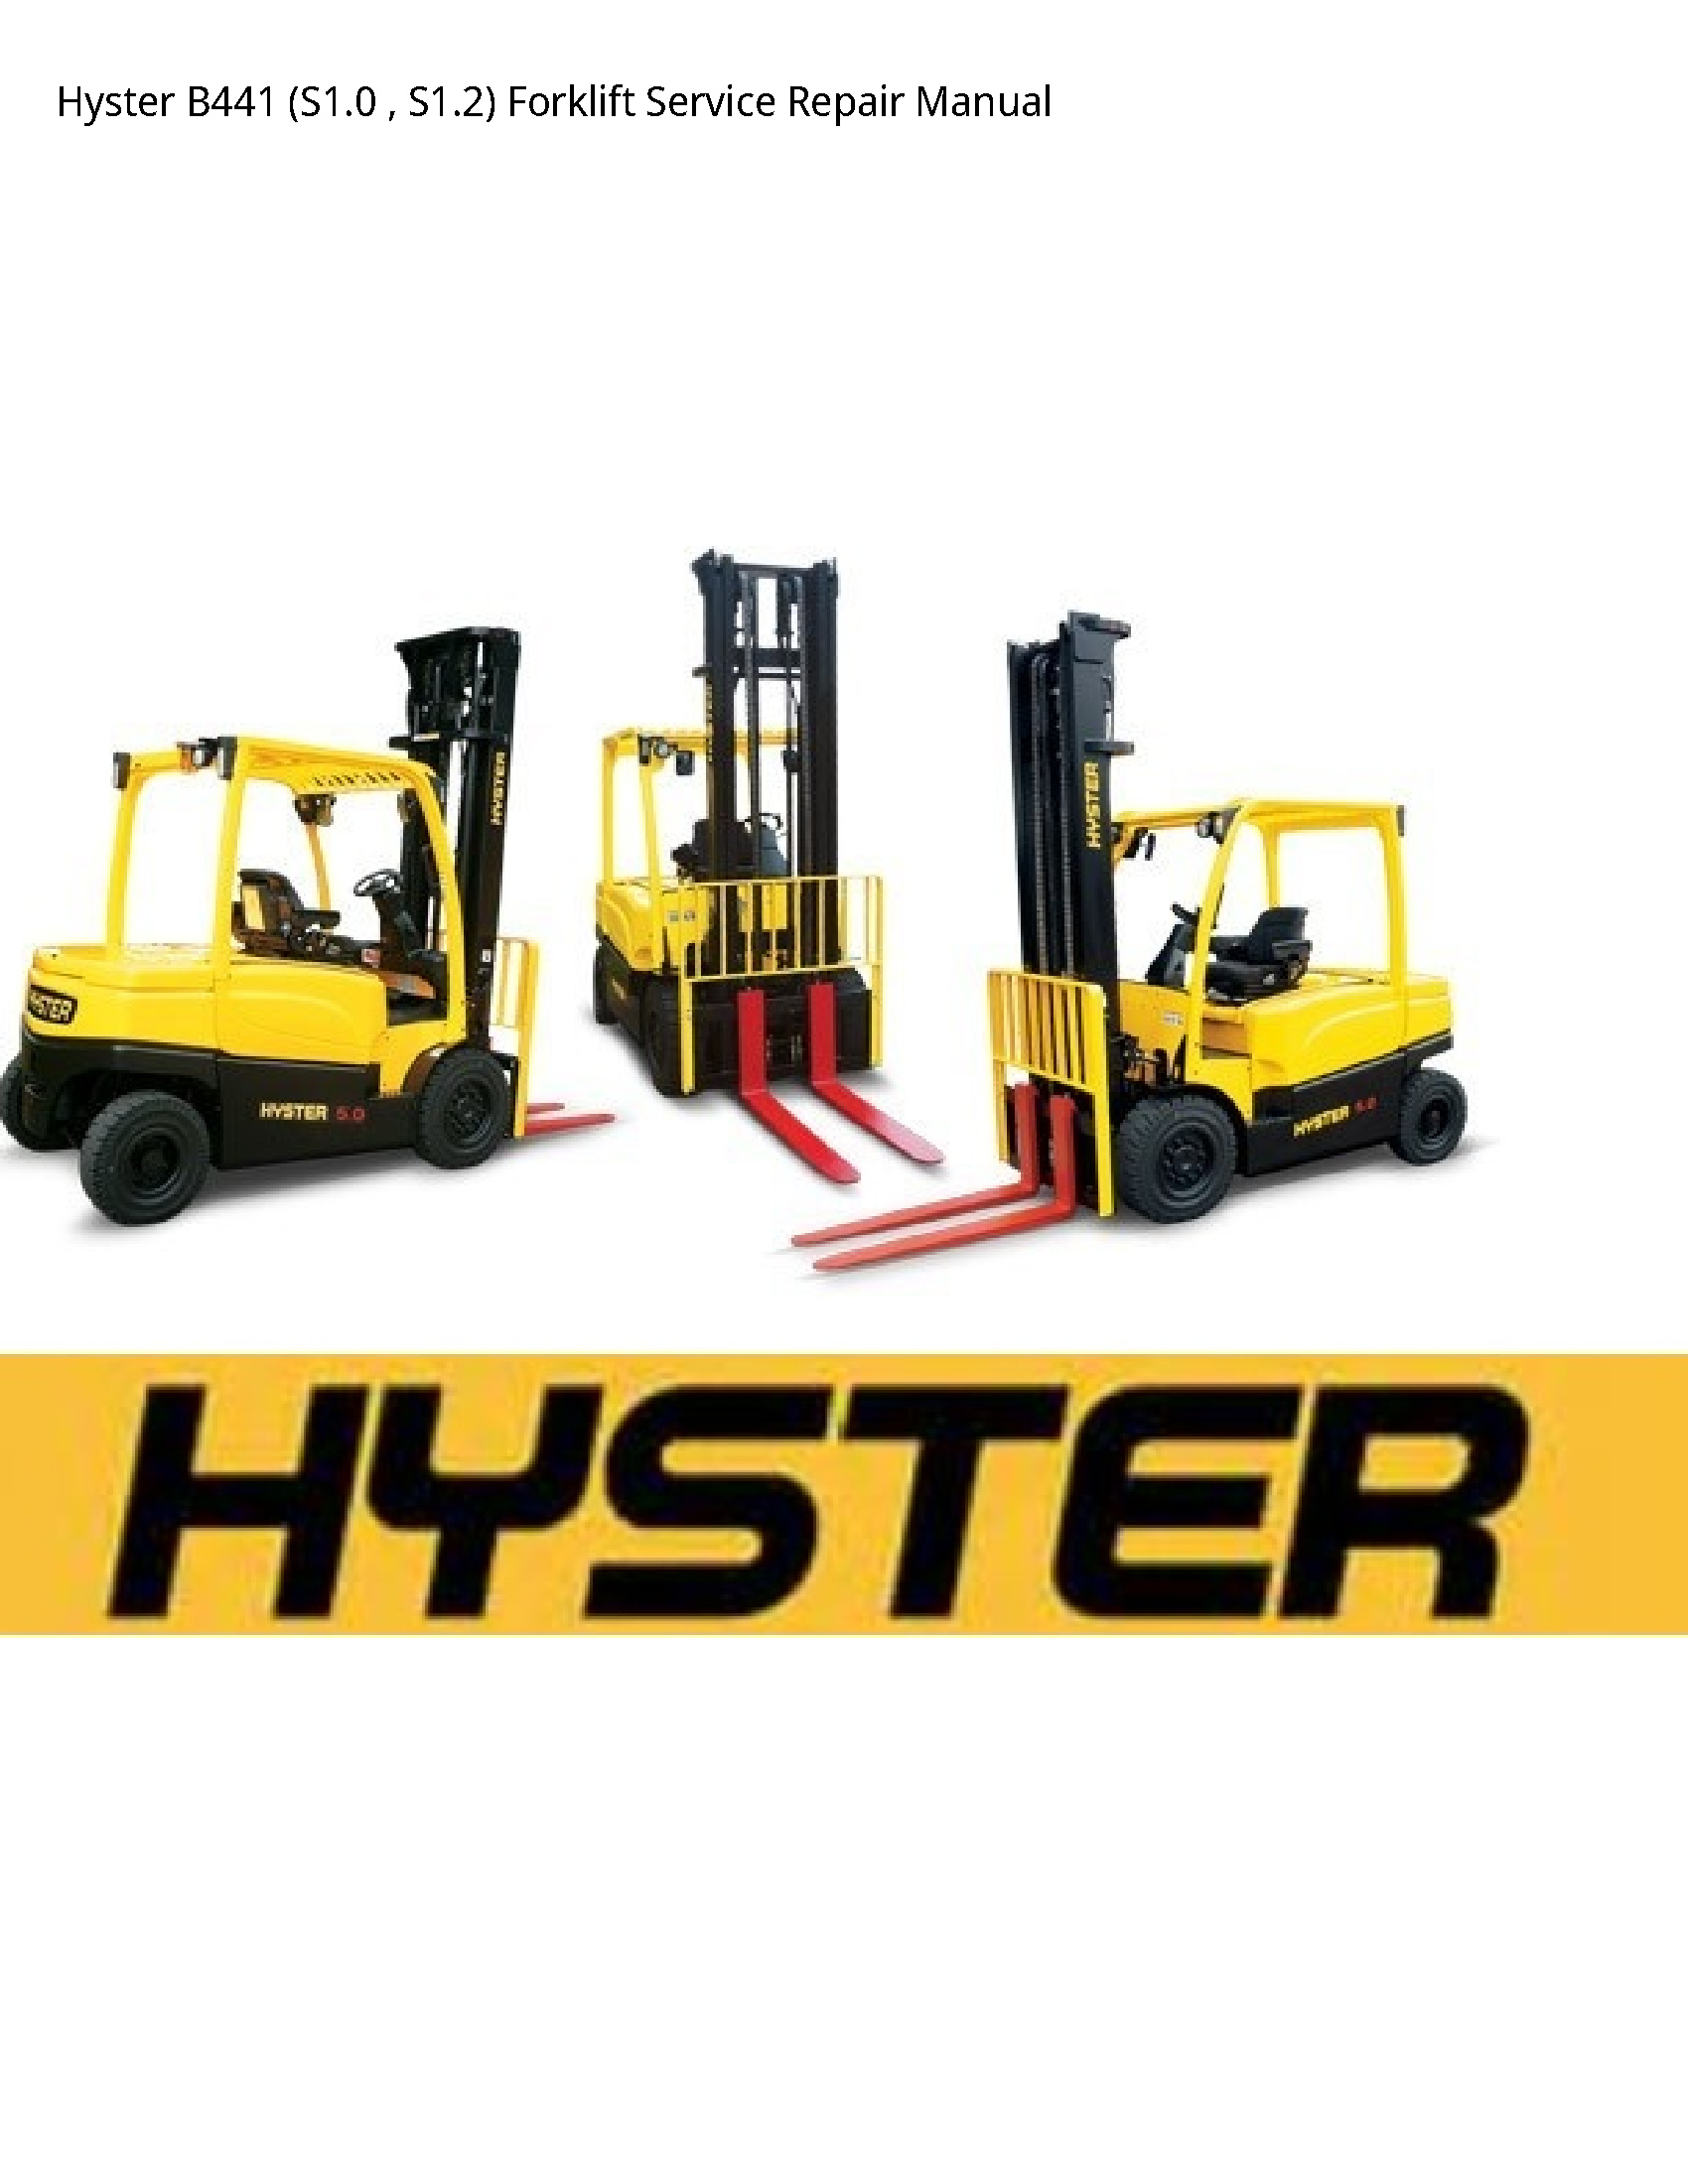 Hyster B441 Forklift manual